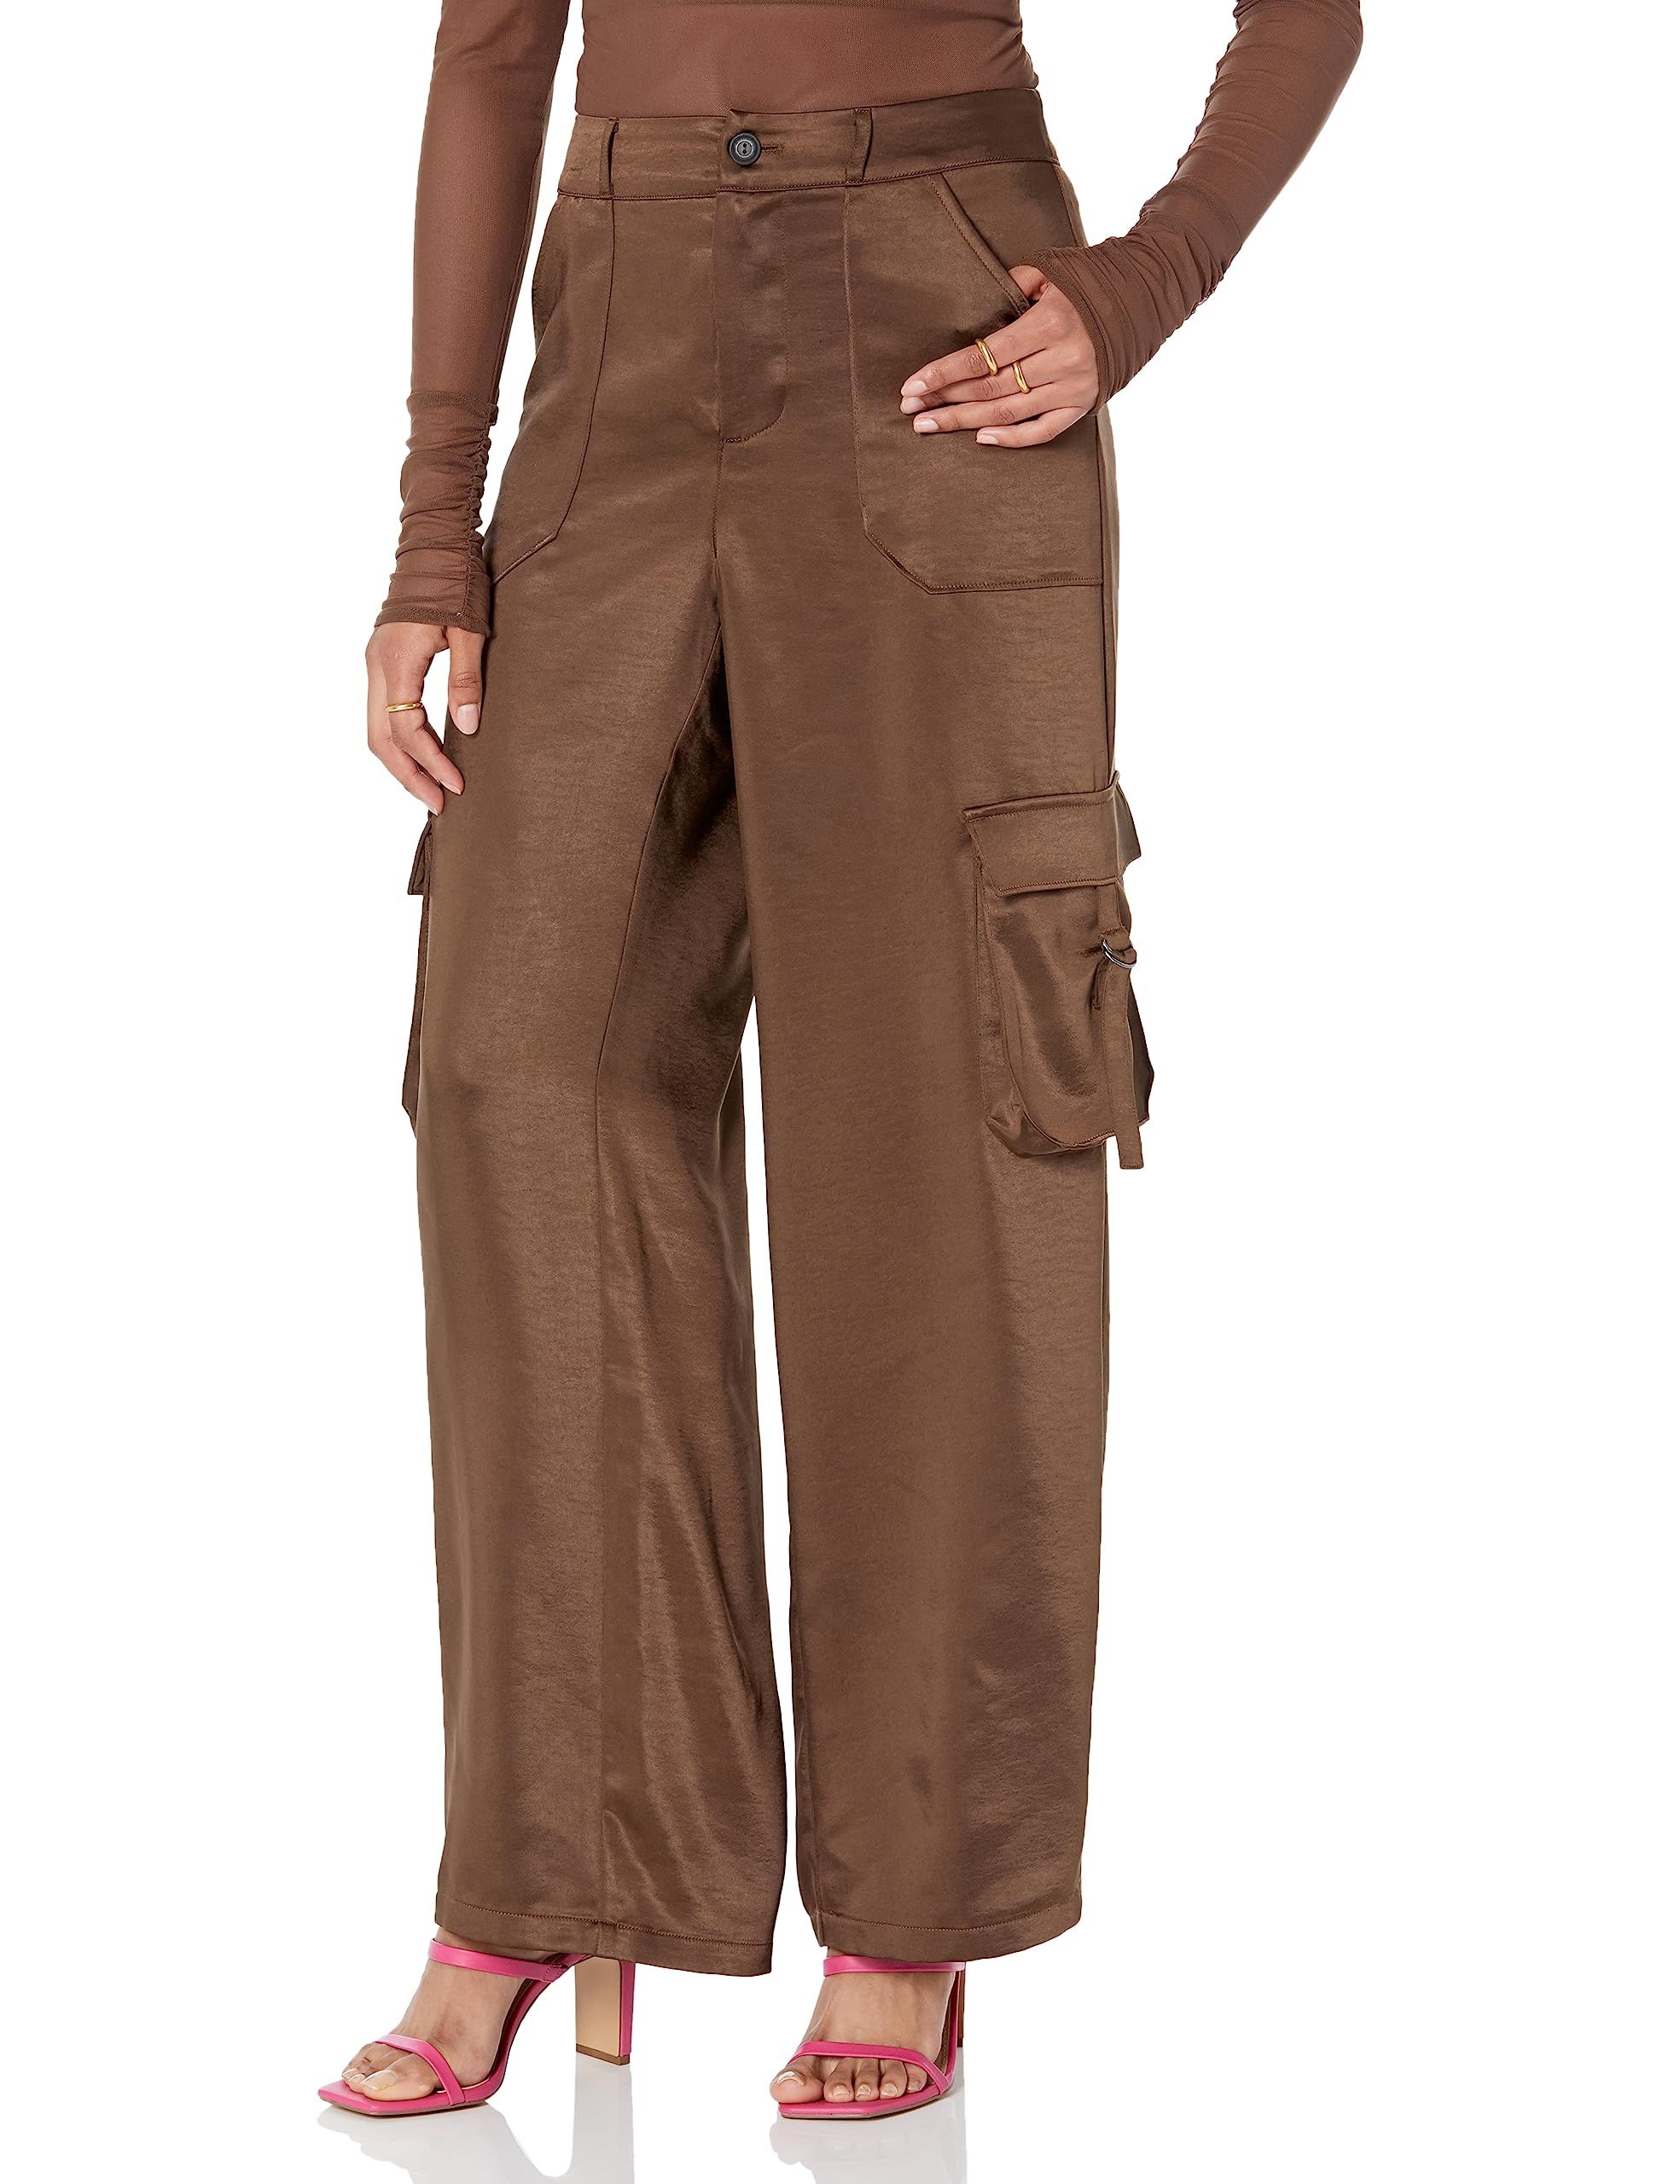 Top 10 Best Cargo Pants for Work  YouTube